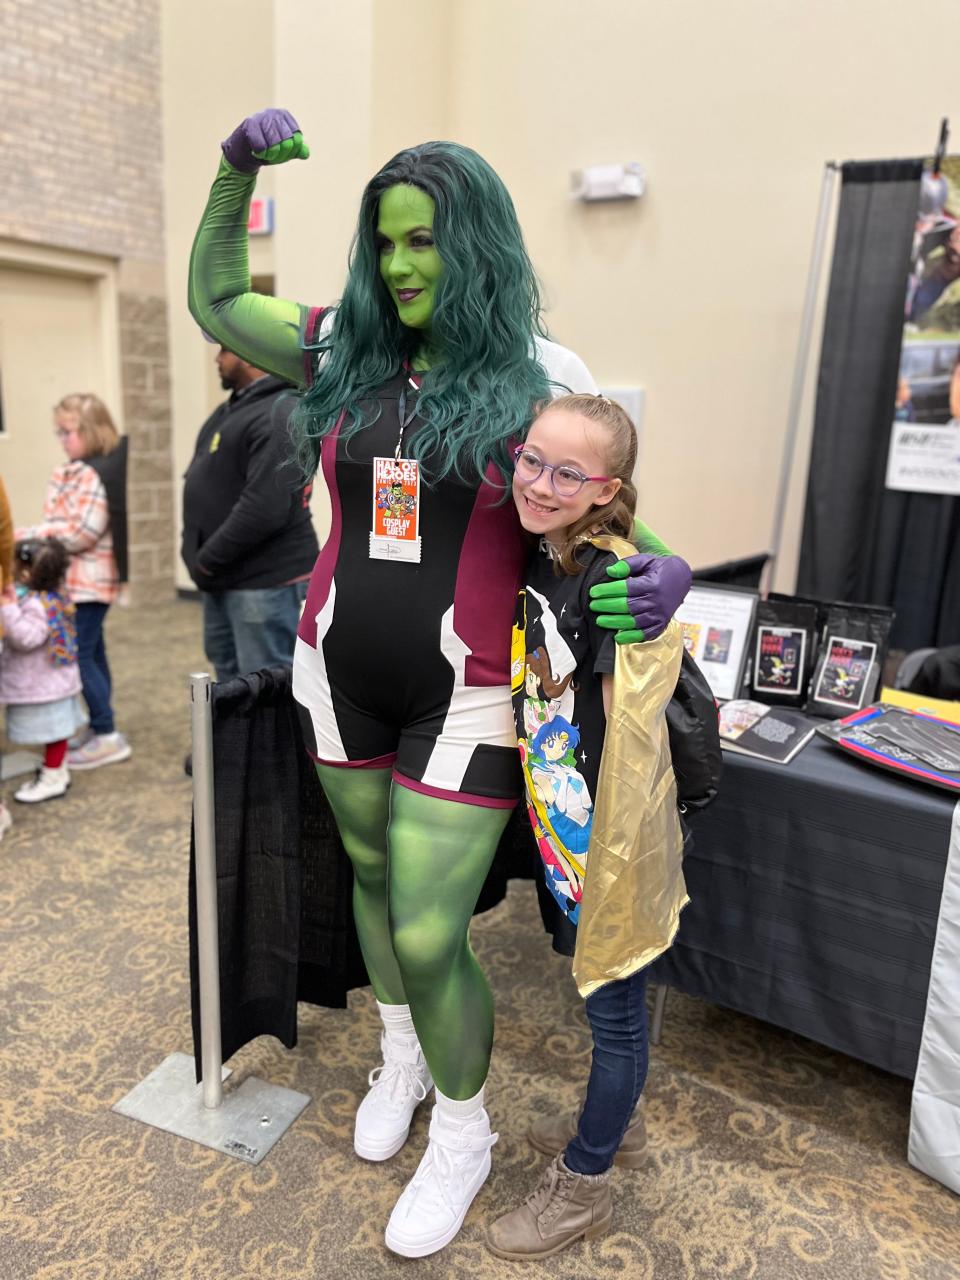 She-Hulk, from the League of Enchantment in Michigan, shows off her strength to Maya York of Elkhart. The League of Enchantment was one of several cosplay groups that use their costume characters to entertain children in hospitals.